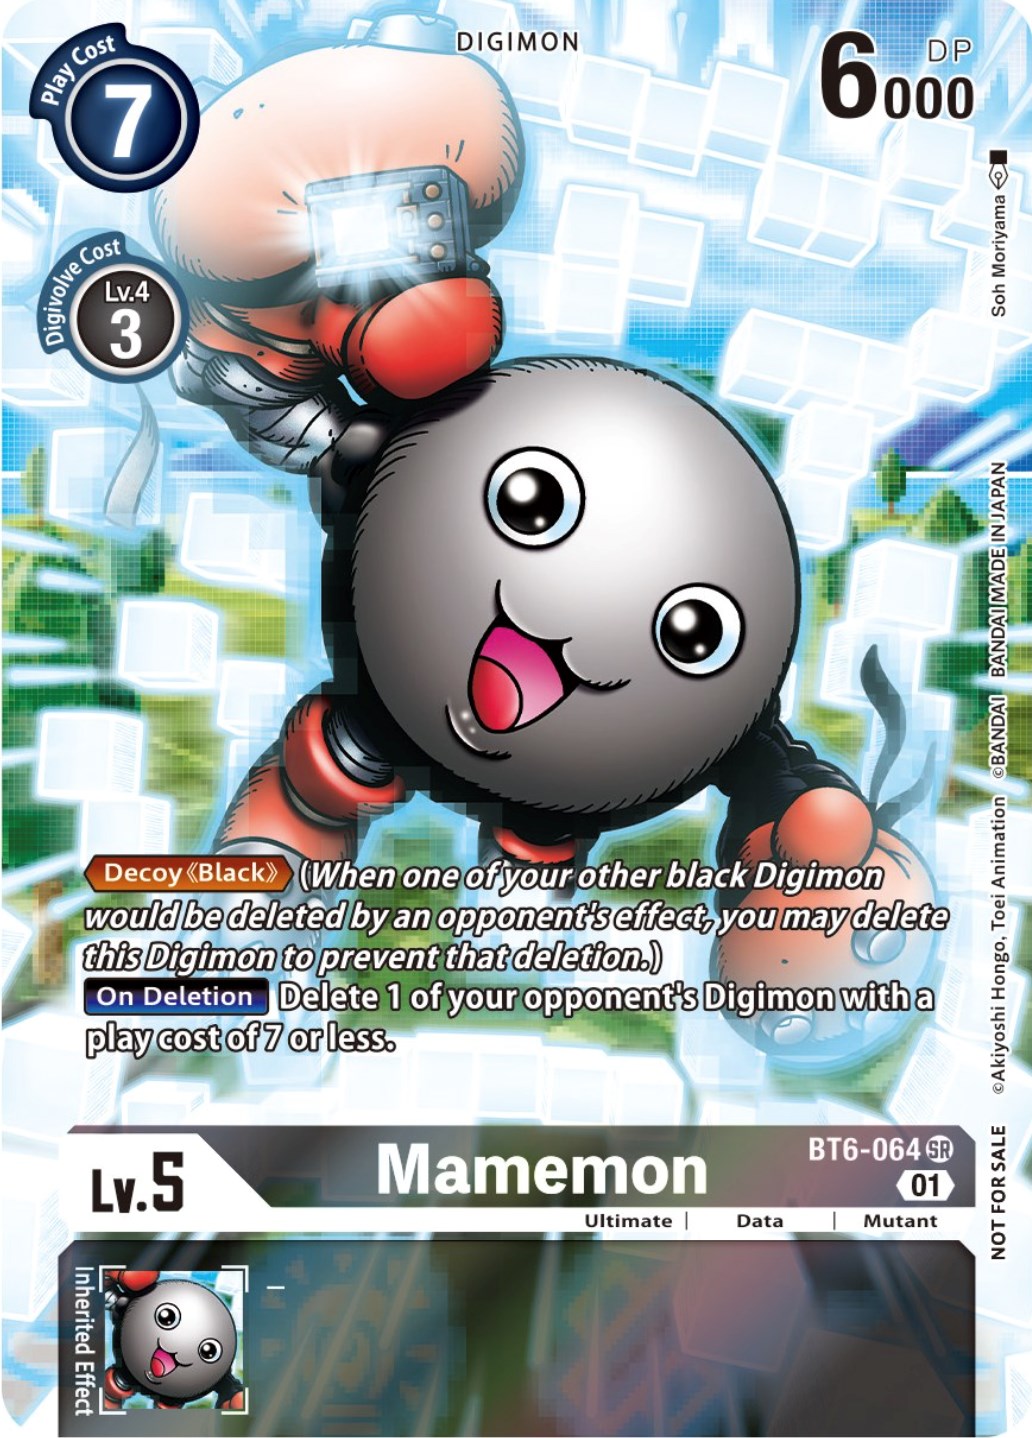 Mamemon [BT6-064] (25th Special Memorial Pack) [Double Diamond Promos] | Total Play